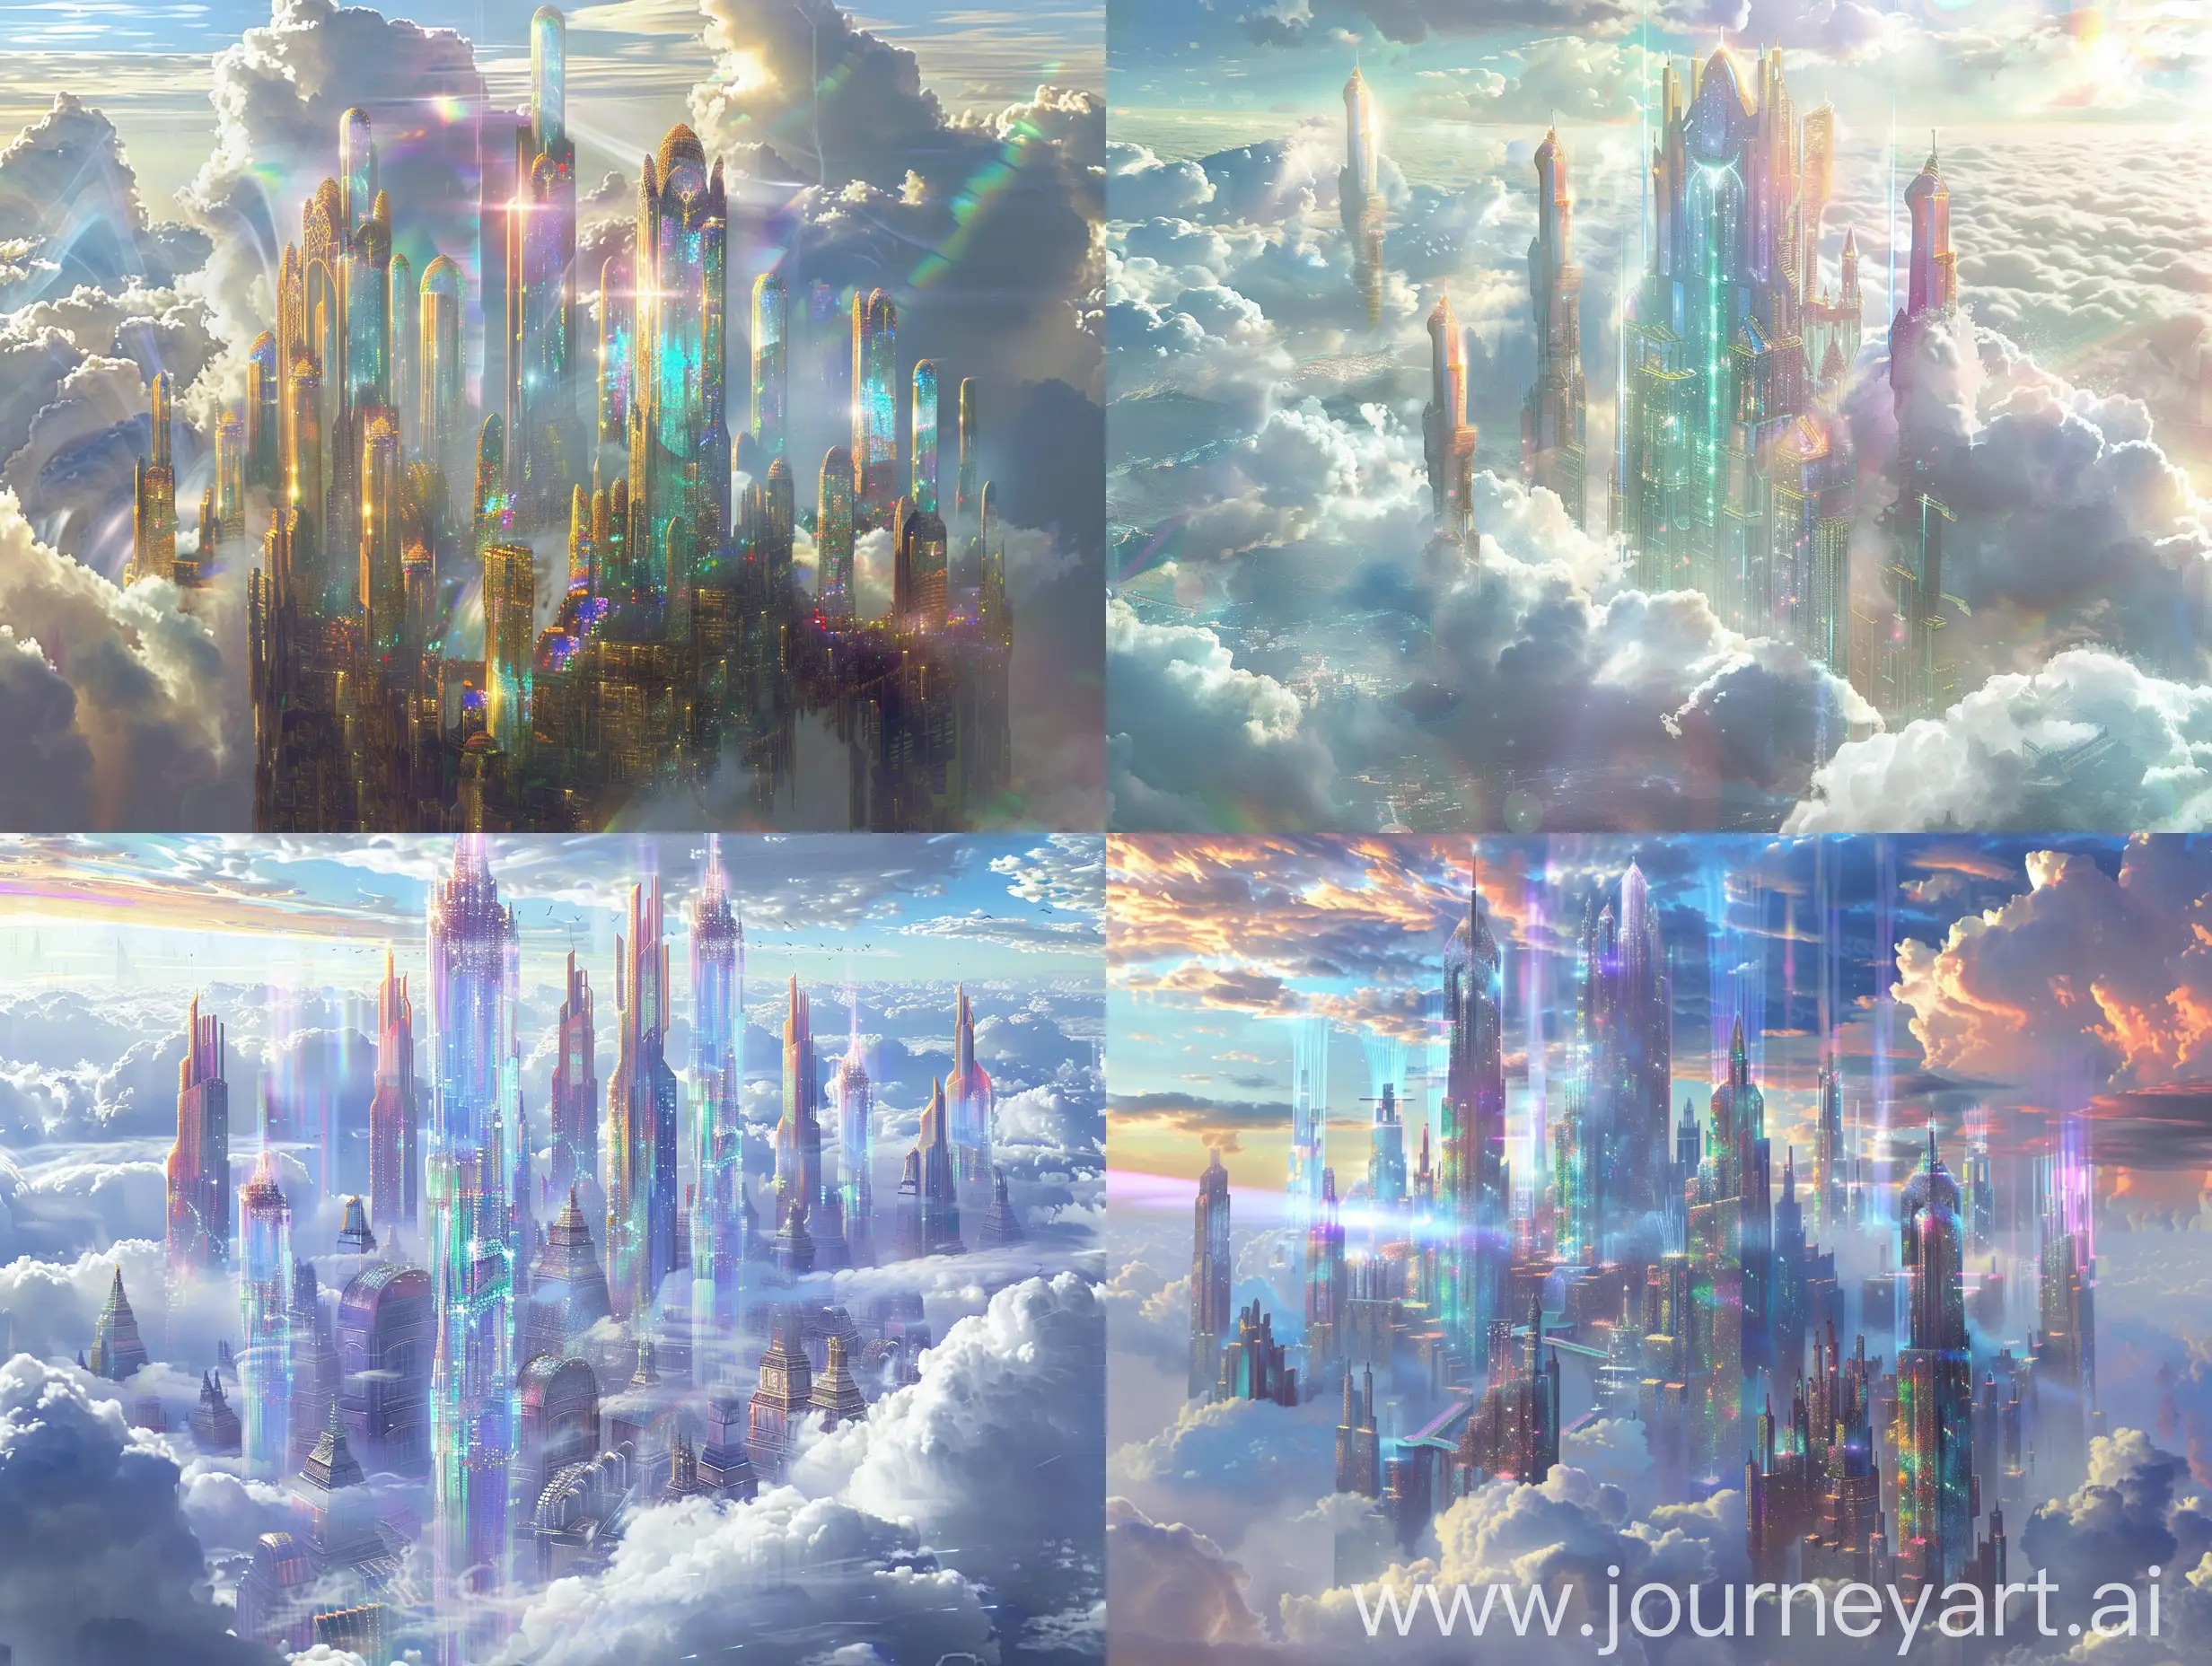 A shimmering ethereal metropolis floats among cotton candy clouds, its towers reaching towards the heavens with dazzling opulence. This concept art painting captures the city's otherworldly beauty, where iridescent buildings reflect sunlight in a mesmerizing dance of colors. Glowing crystals adorn the skyline, casting prismatic rainbows across the sky. The intricate architecture exudes an aura of mystique and wonder, inviting viewers to get lost in its dream-like enchantment.